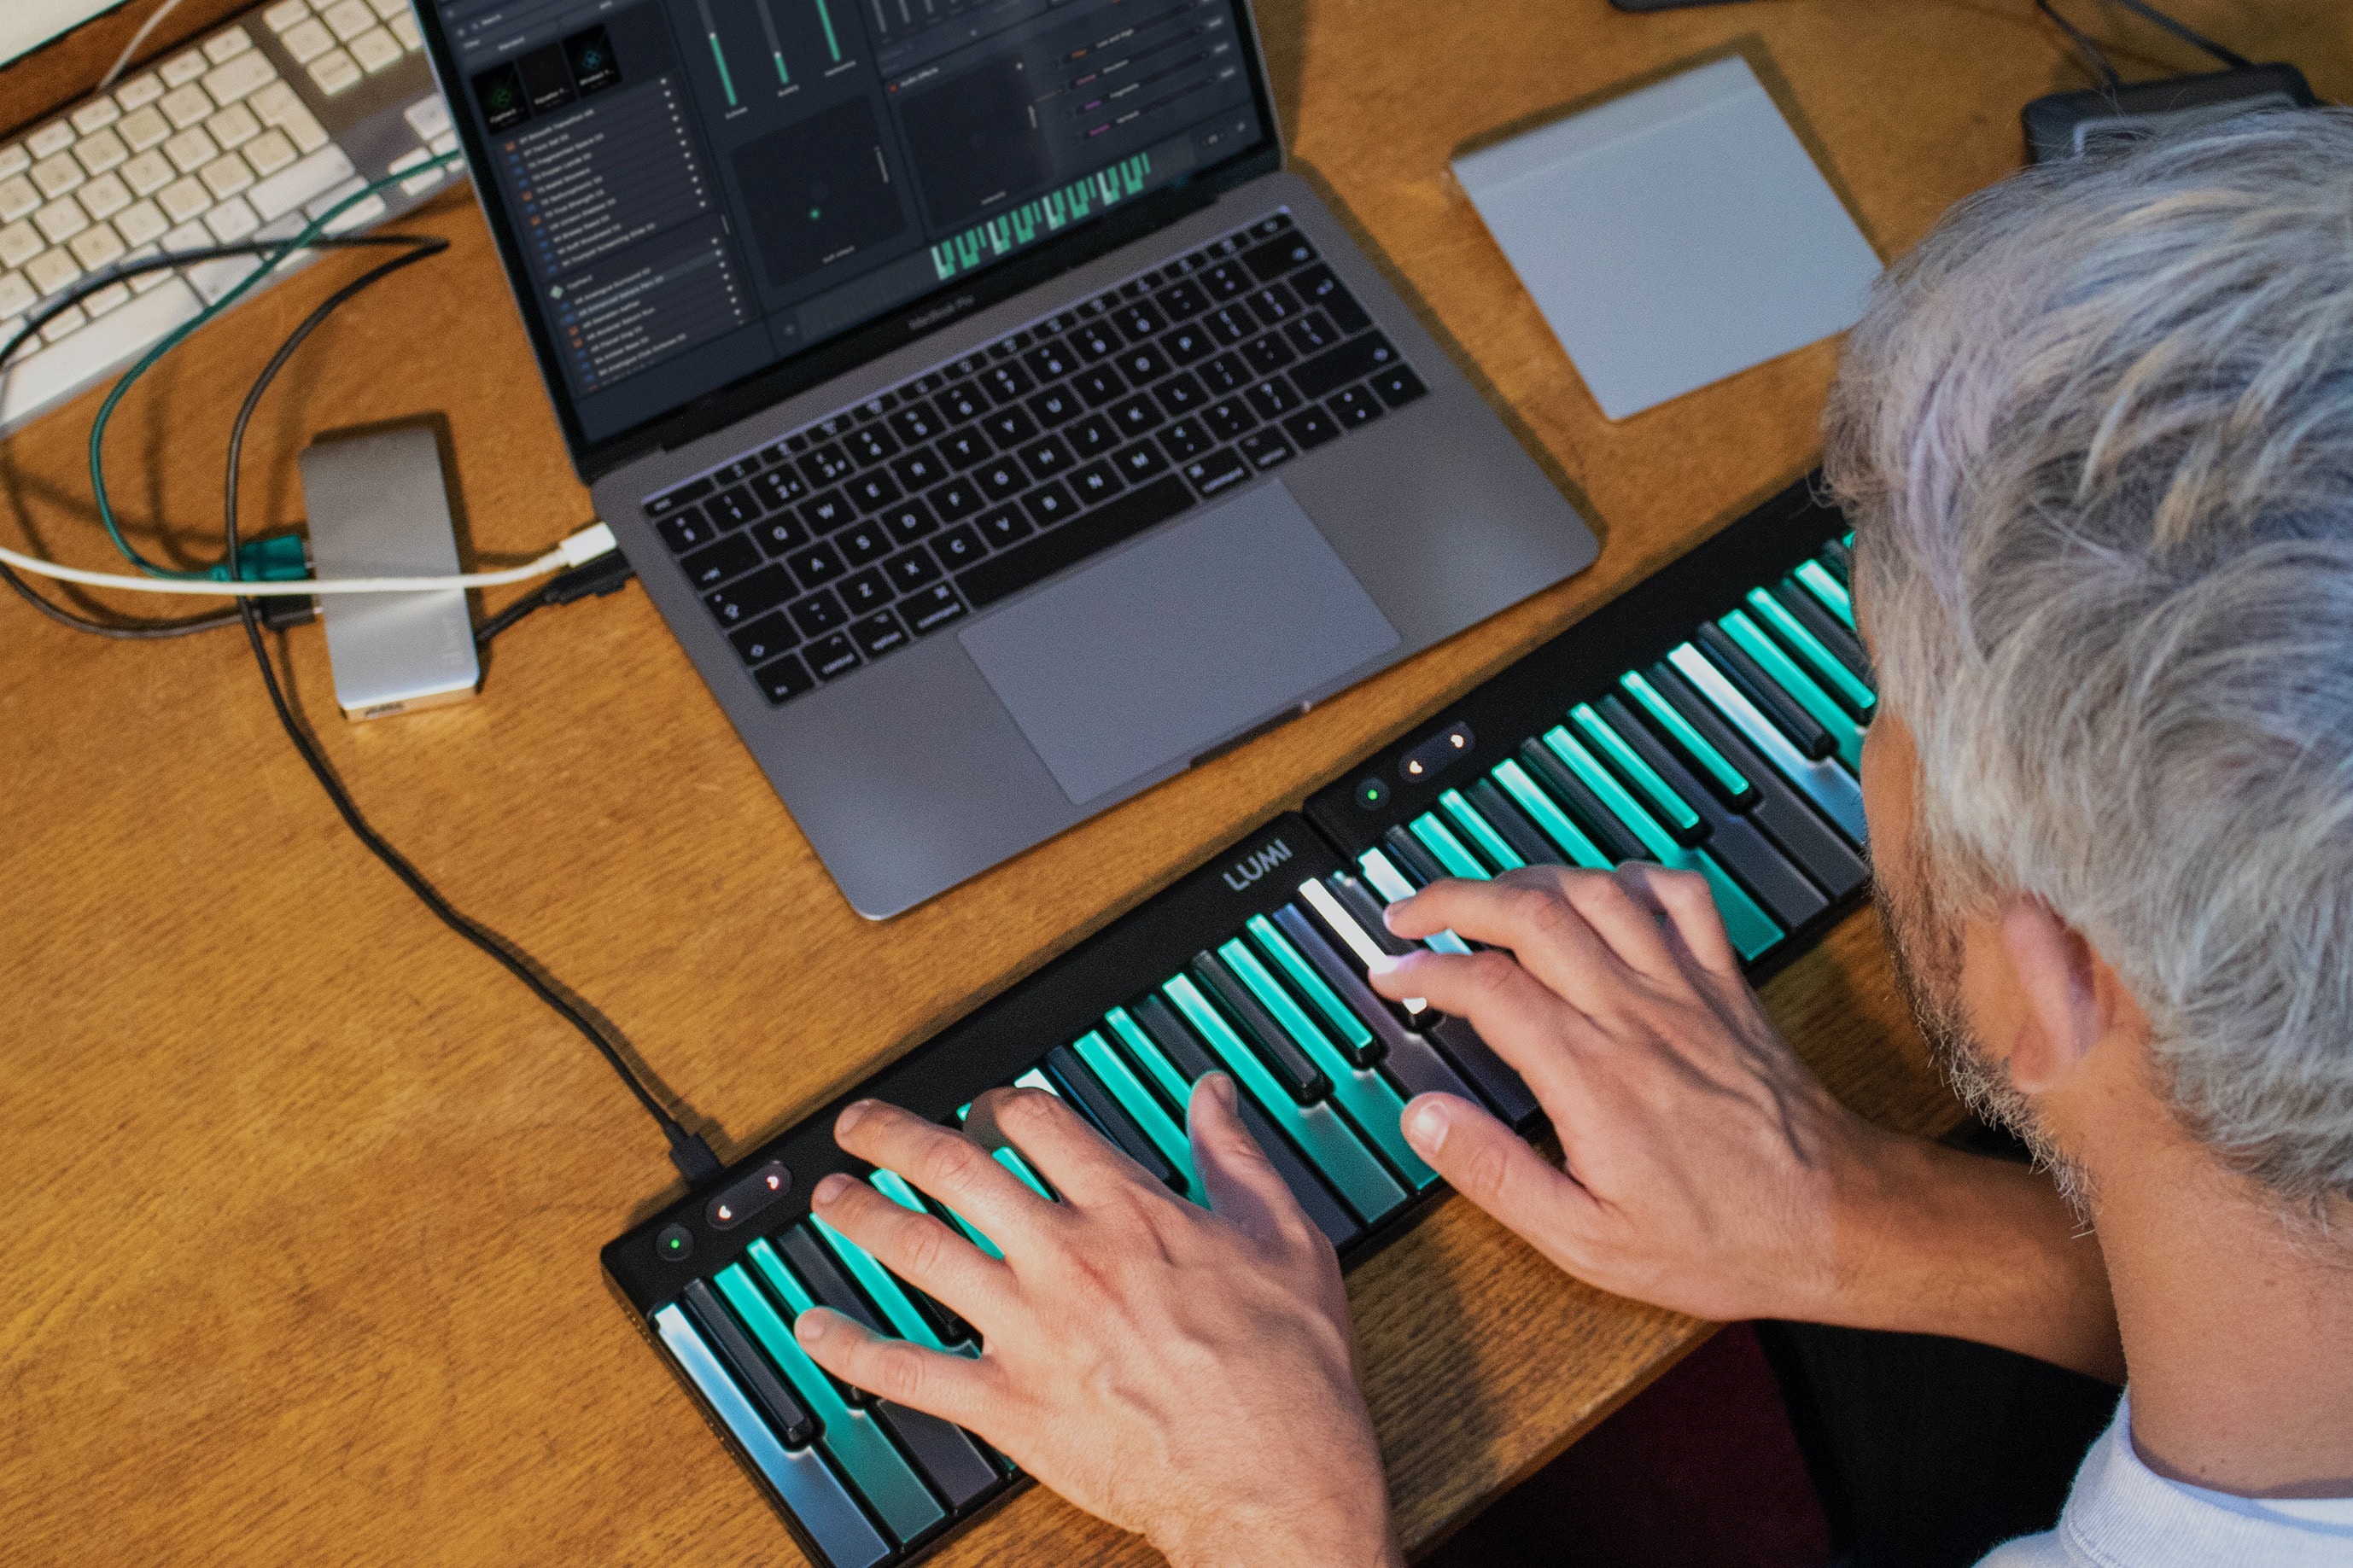 ROLI Releases LUMI Keys Studio Edition, A First-Ever Controller Offering Polyphonic Aftertouch And Per-Key Pitch-Bend